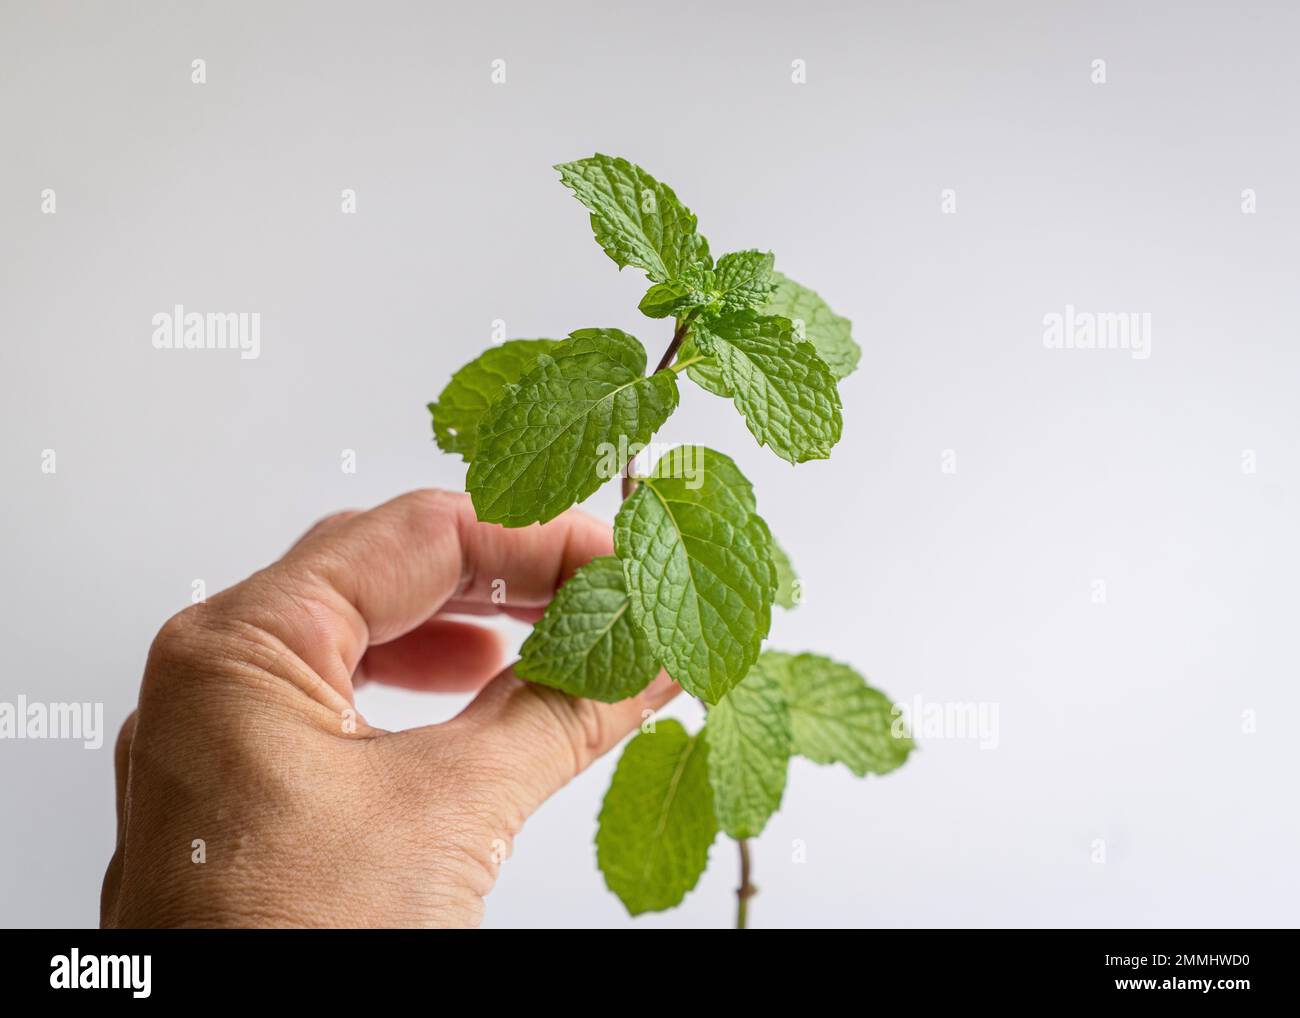 Hand holding a stalk of mint leaf. On white background. Stock Photo